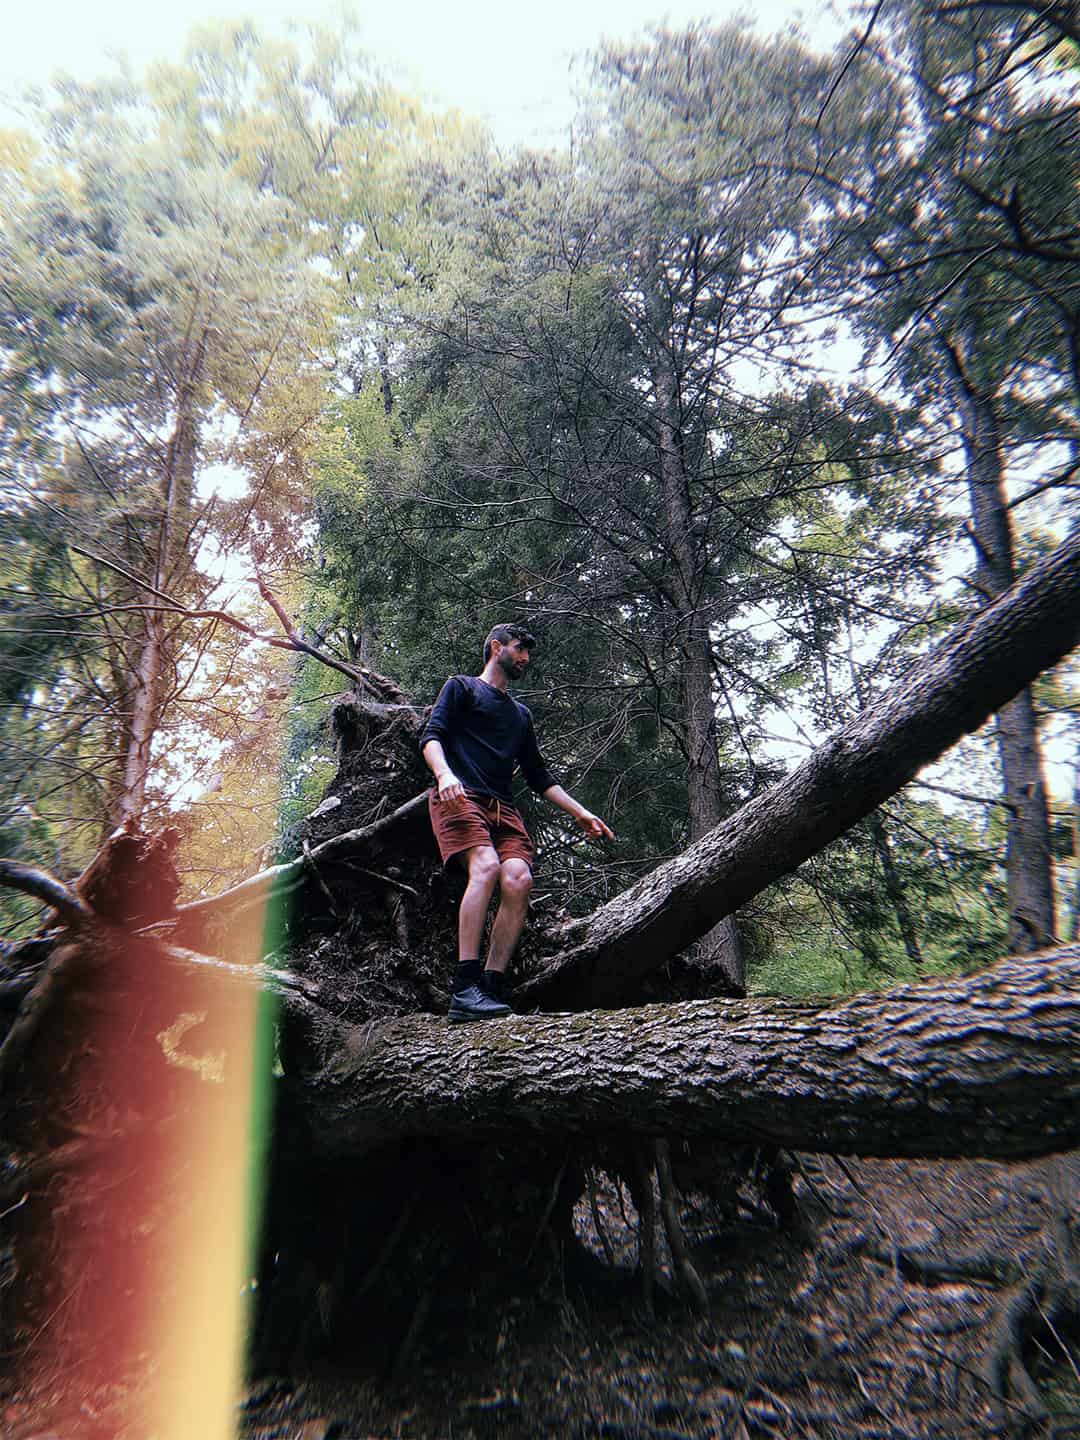 Image of Max Mira climbing a tree for mixed signals interview